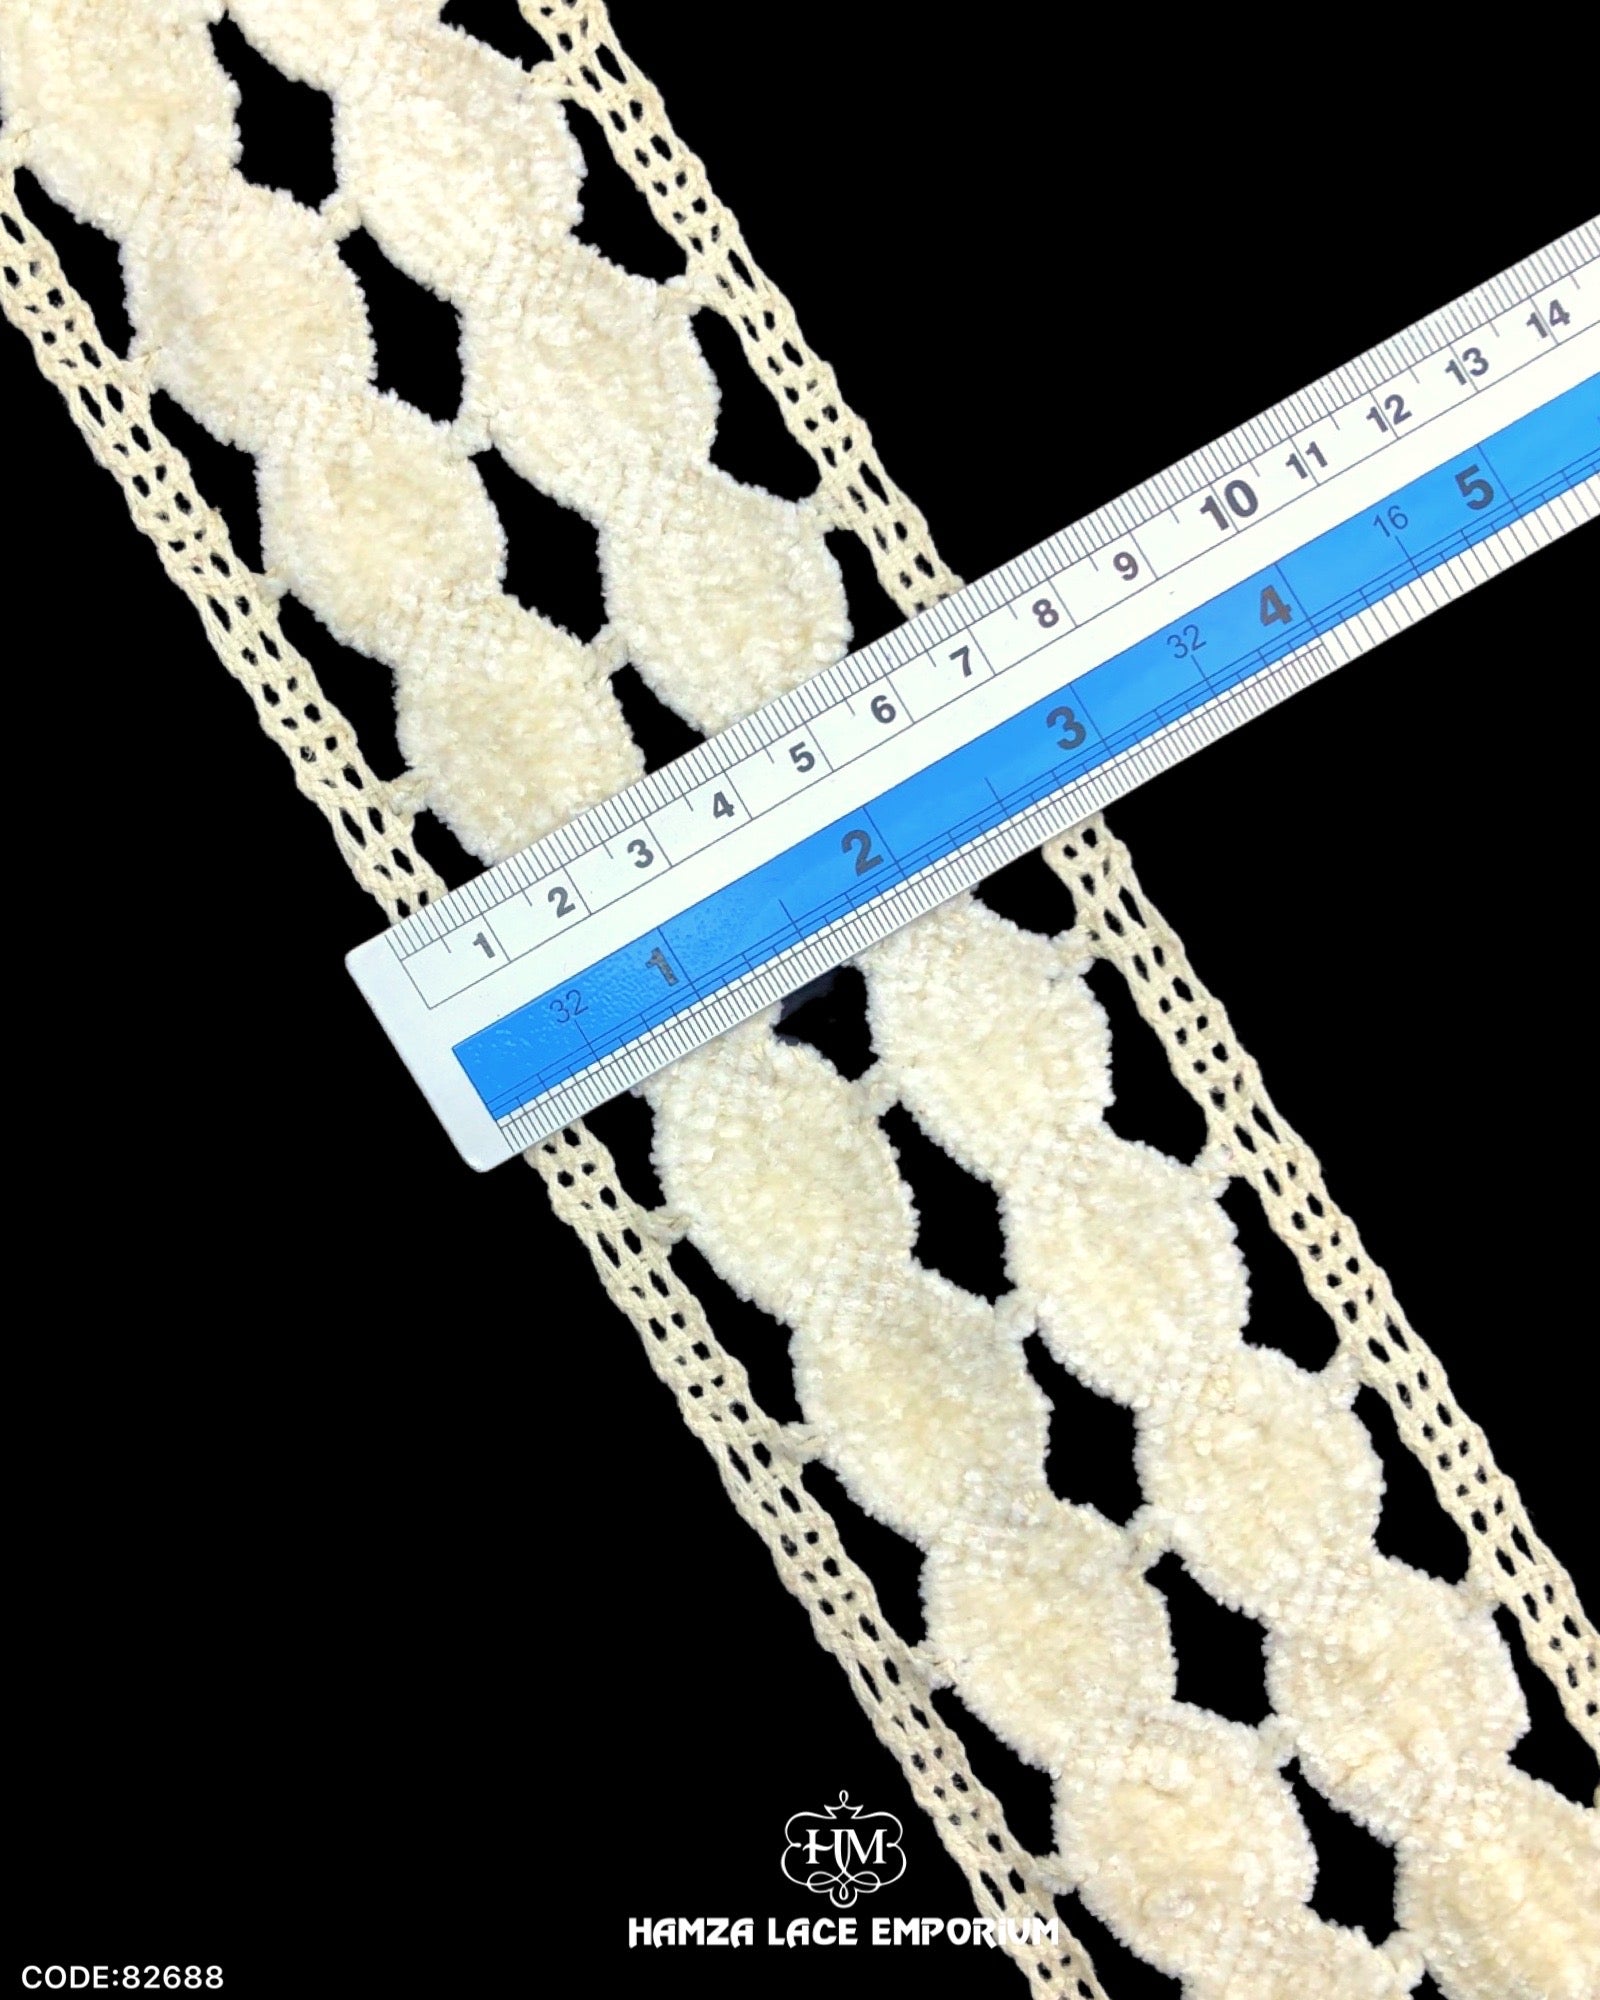 Size of the 'Center Filling Crochet Lace 82688' is given with the help of a ruler as '3' inches